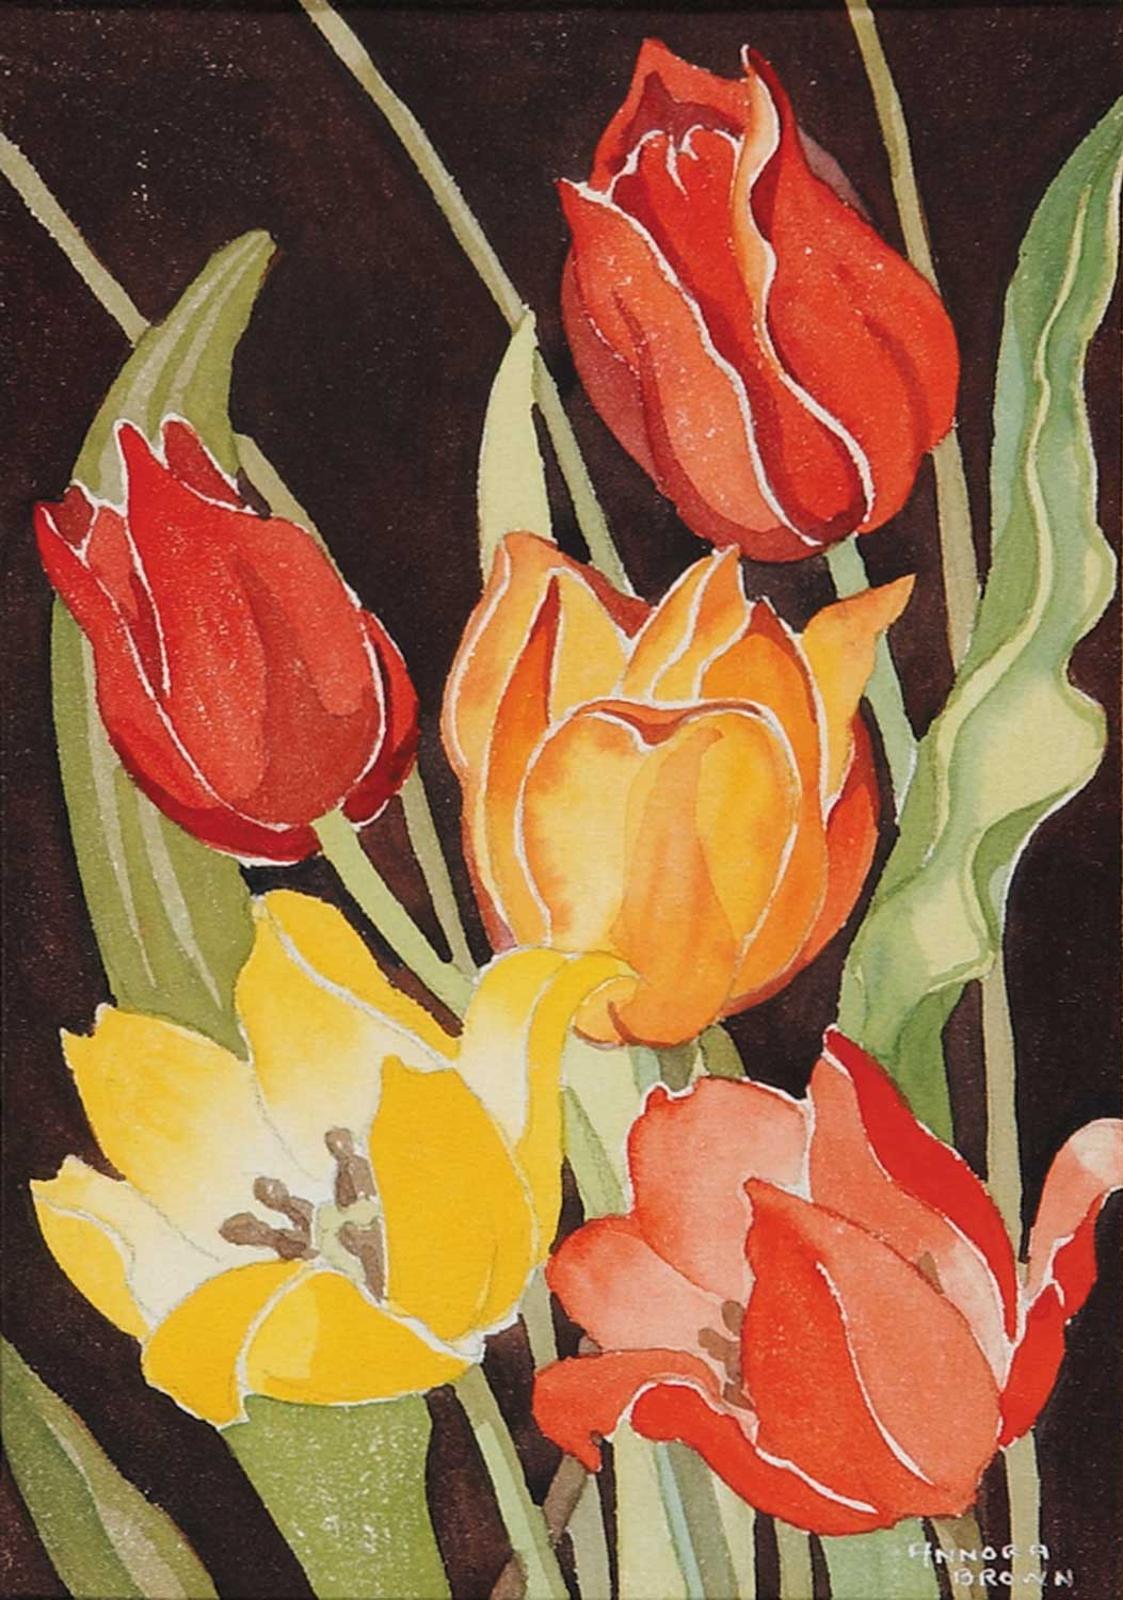 Annora Brown (1899-1987) - Untitled - Blooming Tulips